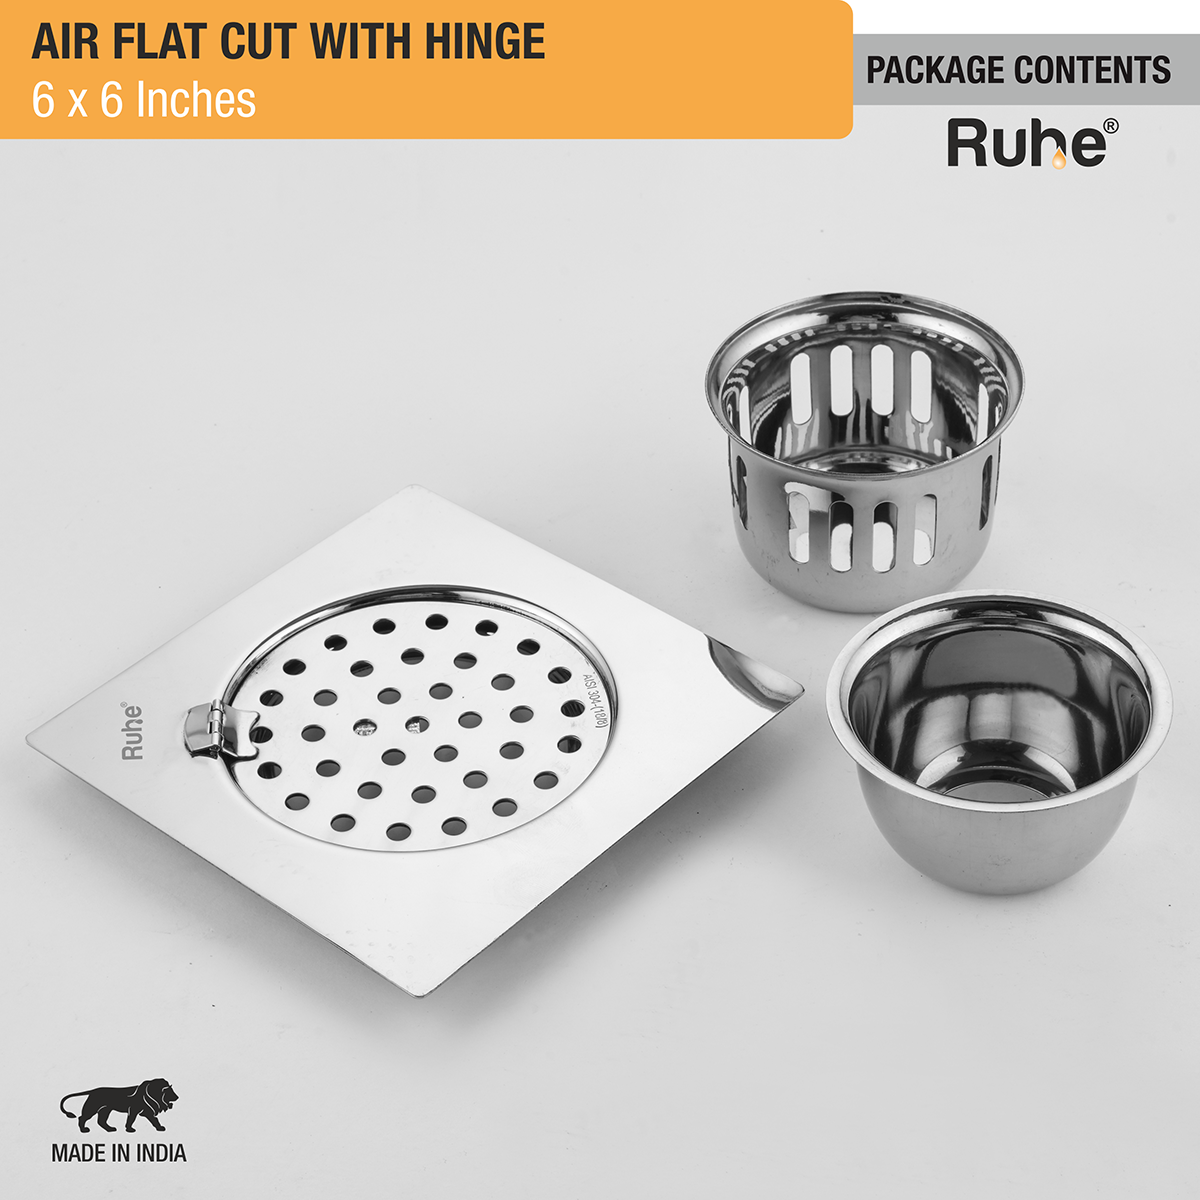 Air Square Flat Cut Floor Drain (6 x 6 Inches) with Hinge & Cockroach Trap (304 Grade) package content